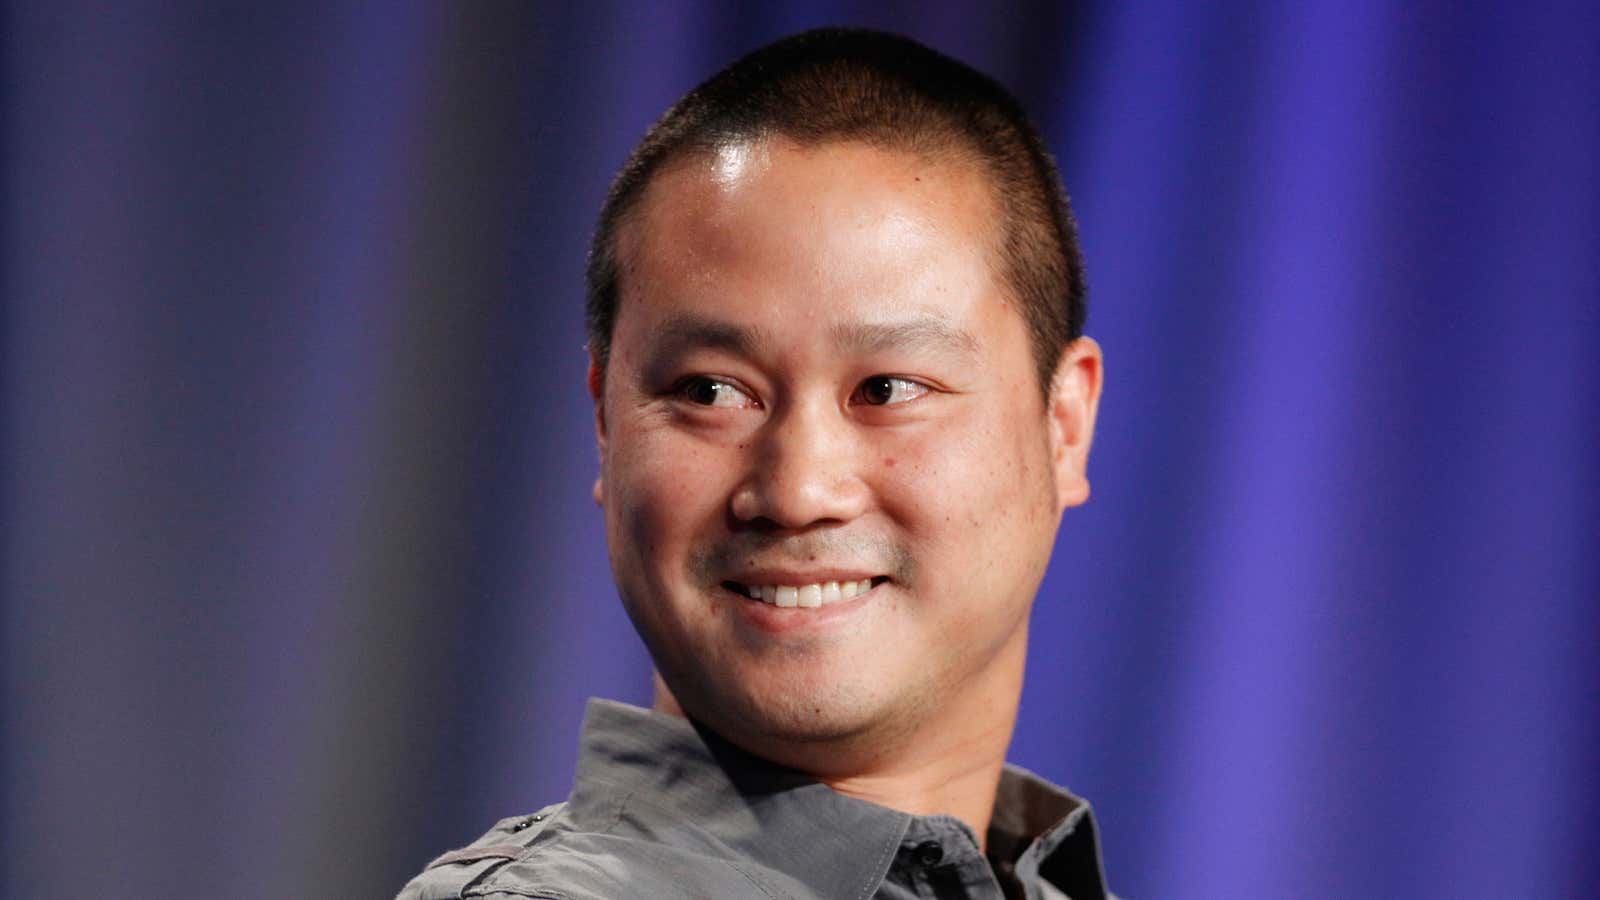 Tony Hsieh, CEO of online retailer Zappos, takes part in a panel discussion entitled “Why Wait for Washington? How States Can Create Jobs and Economic…